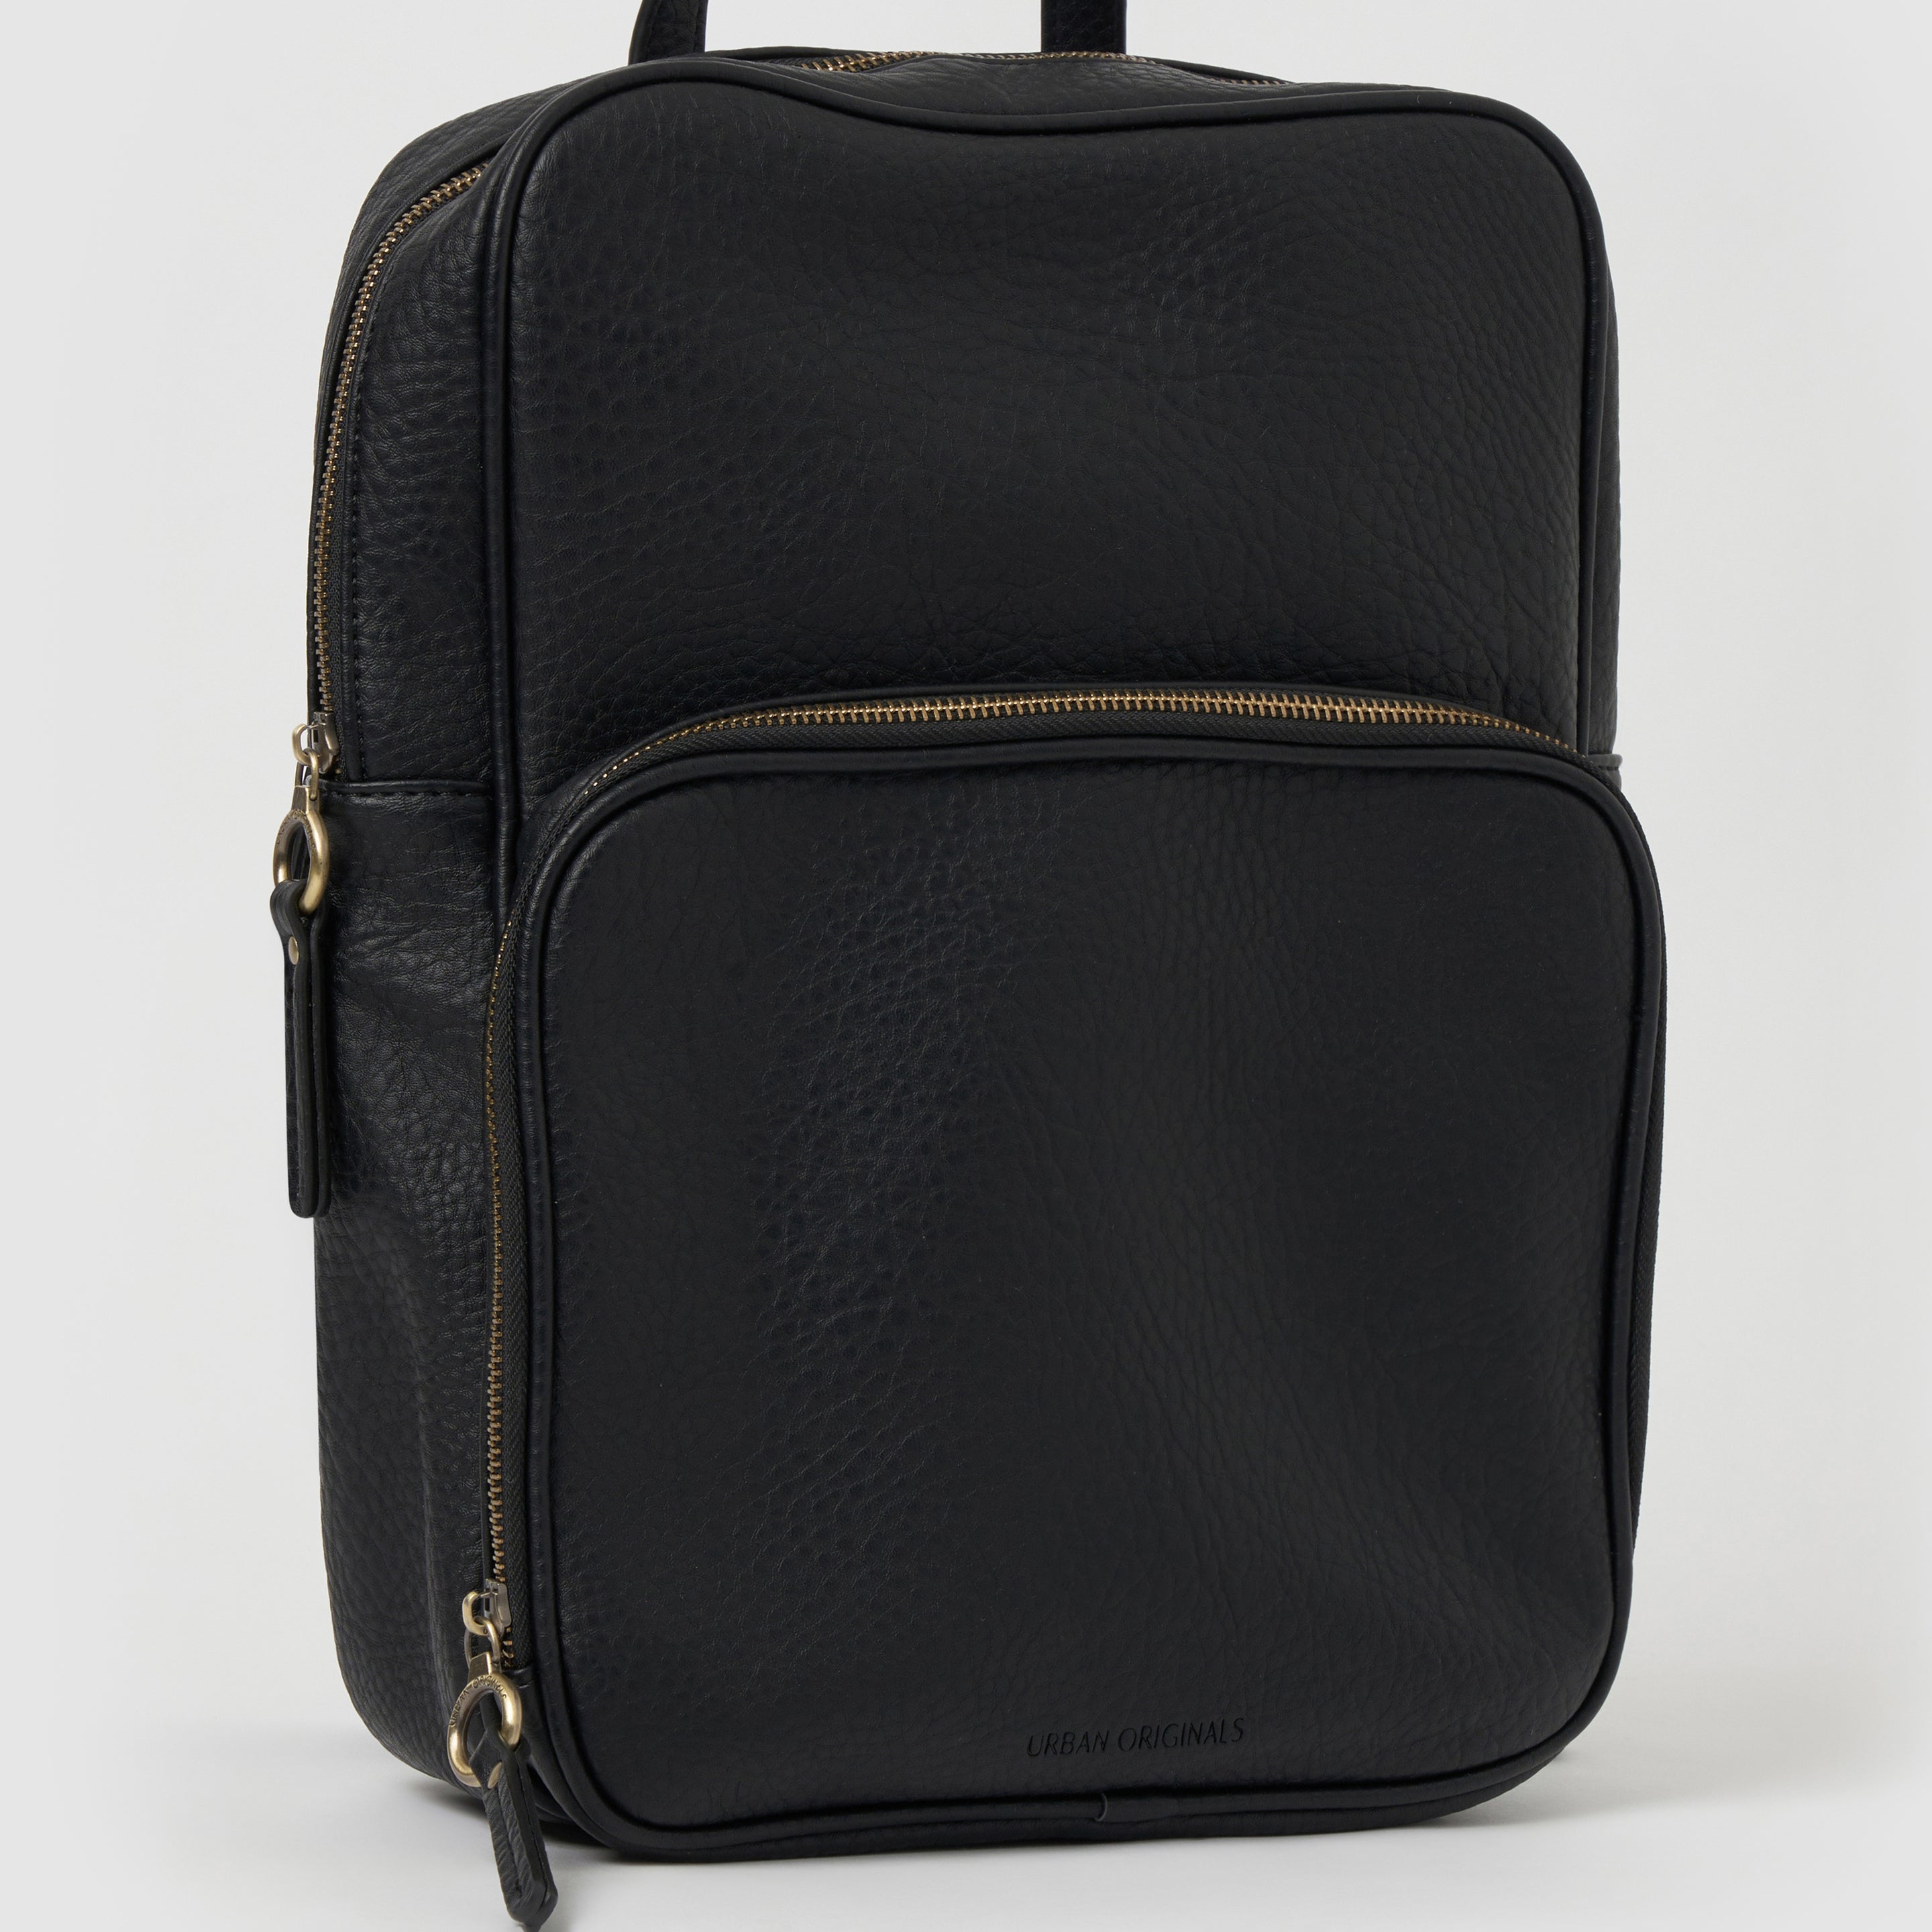 Load image into Gallery viewer, Blackbird Backpack - Black
